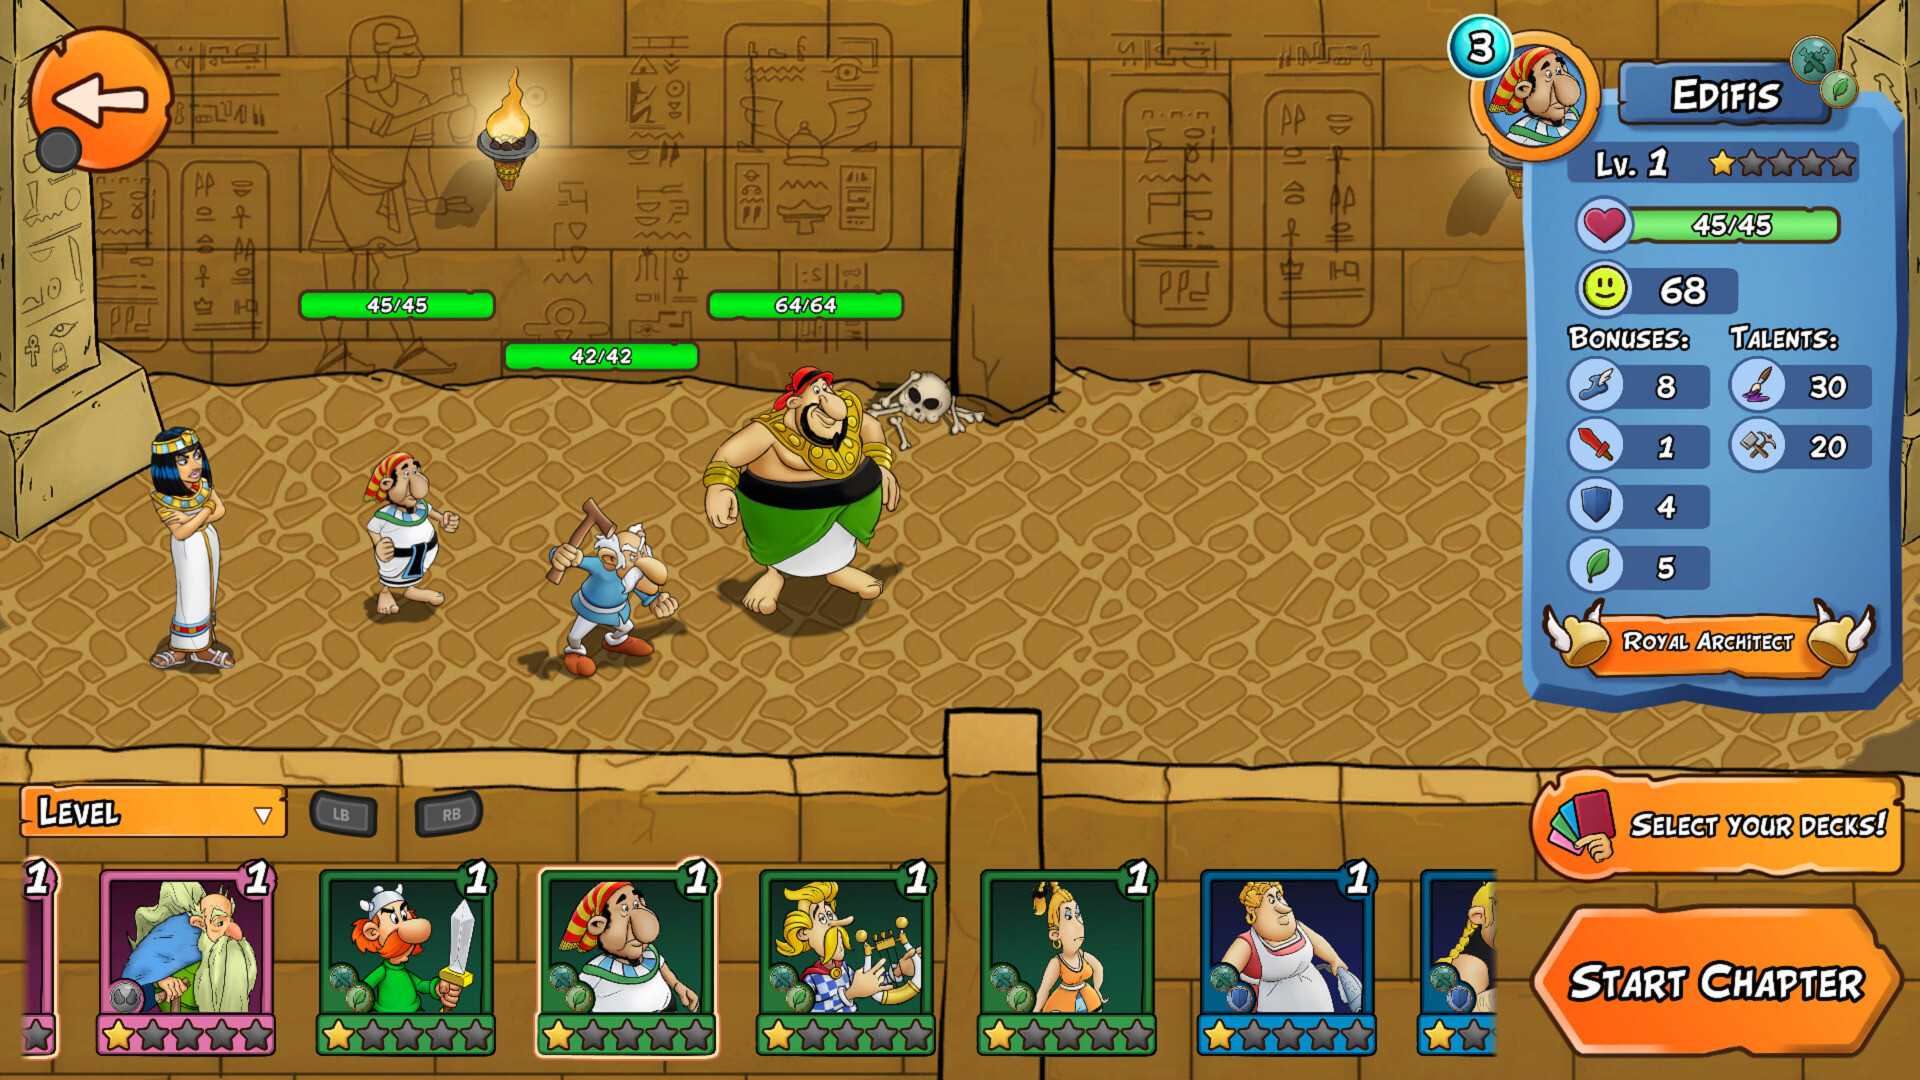 Asterix & Obelix: Heroes on Steam